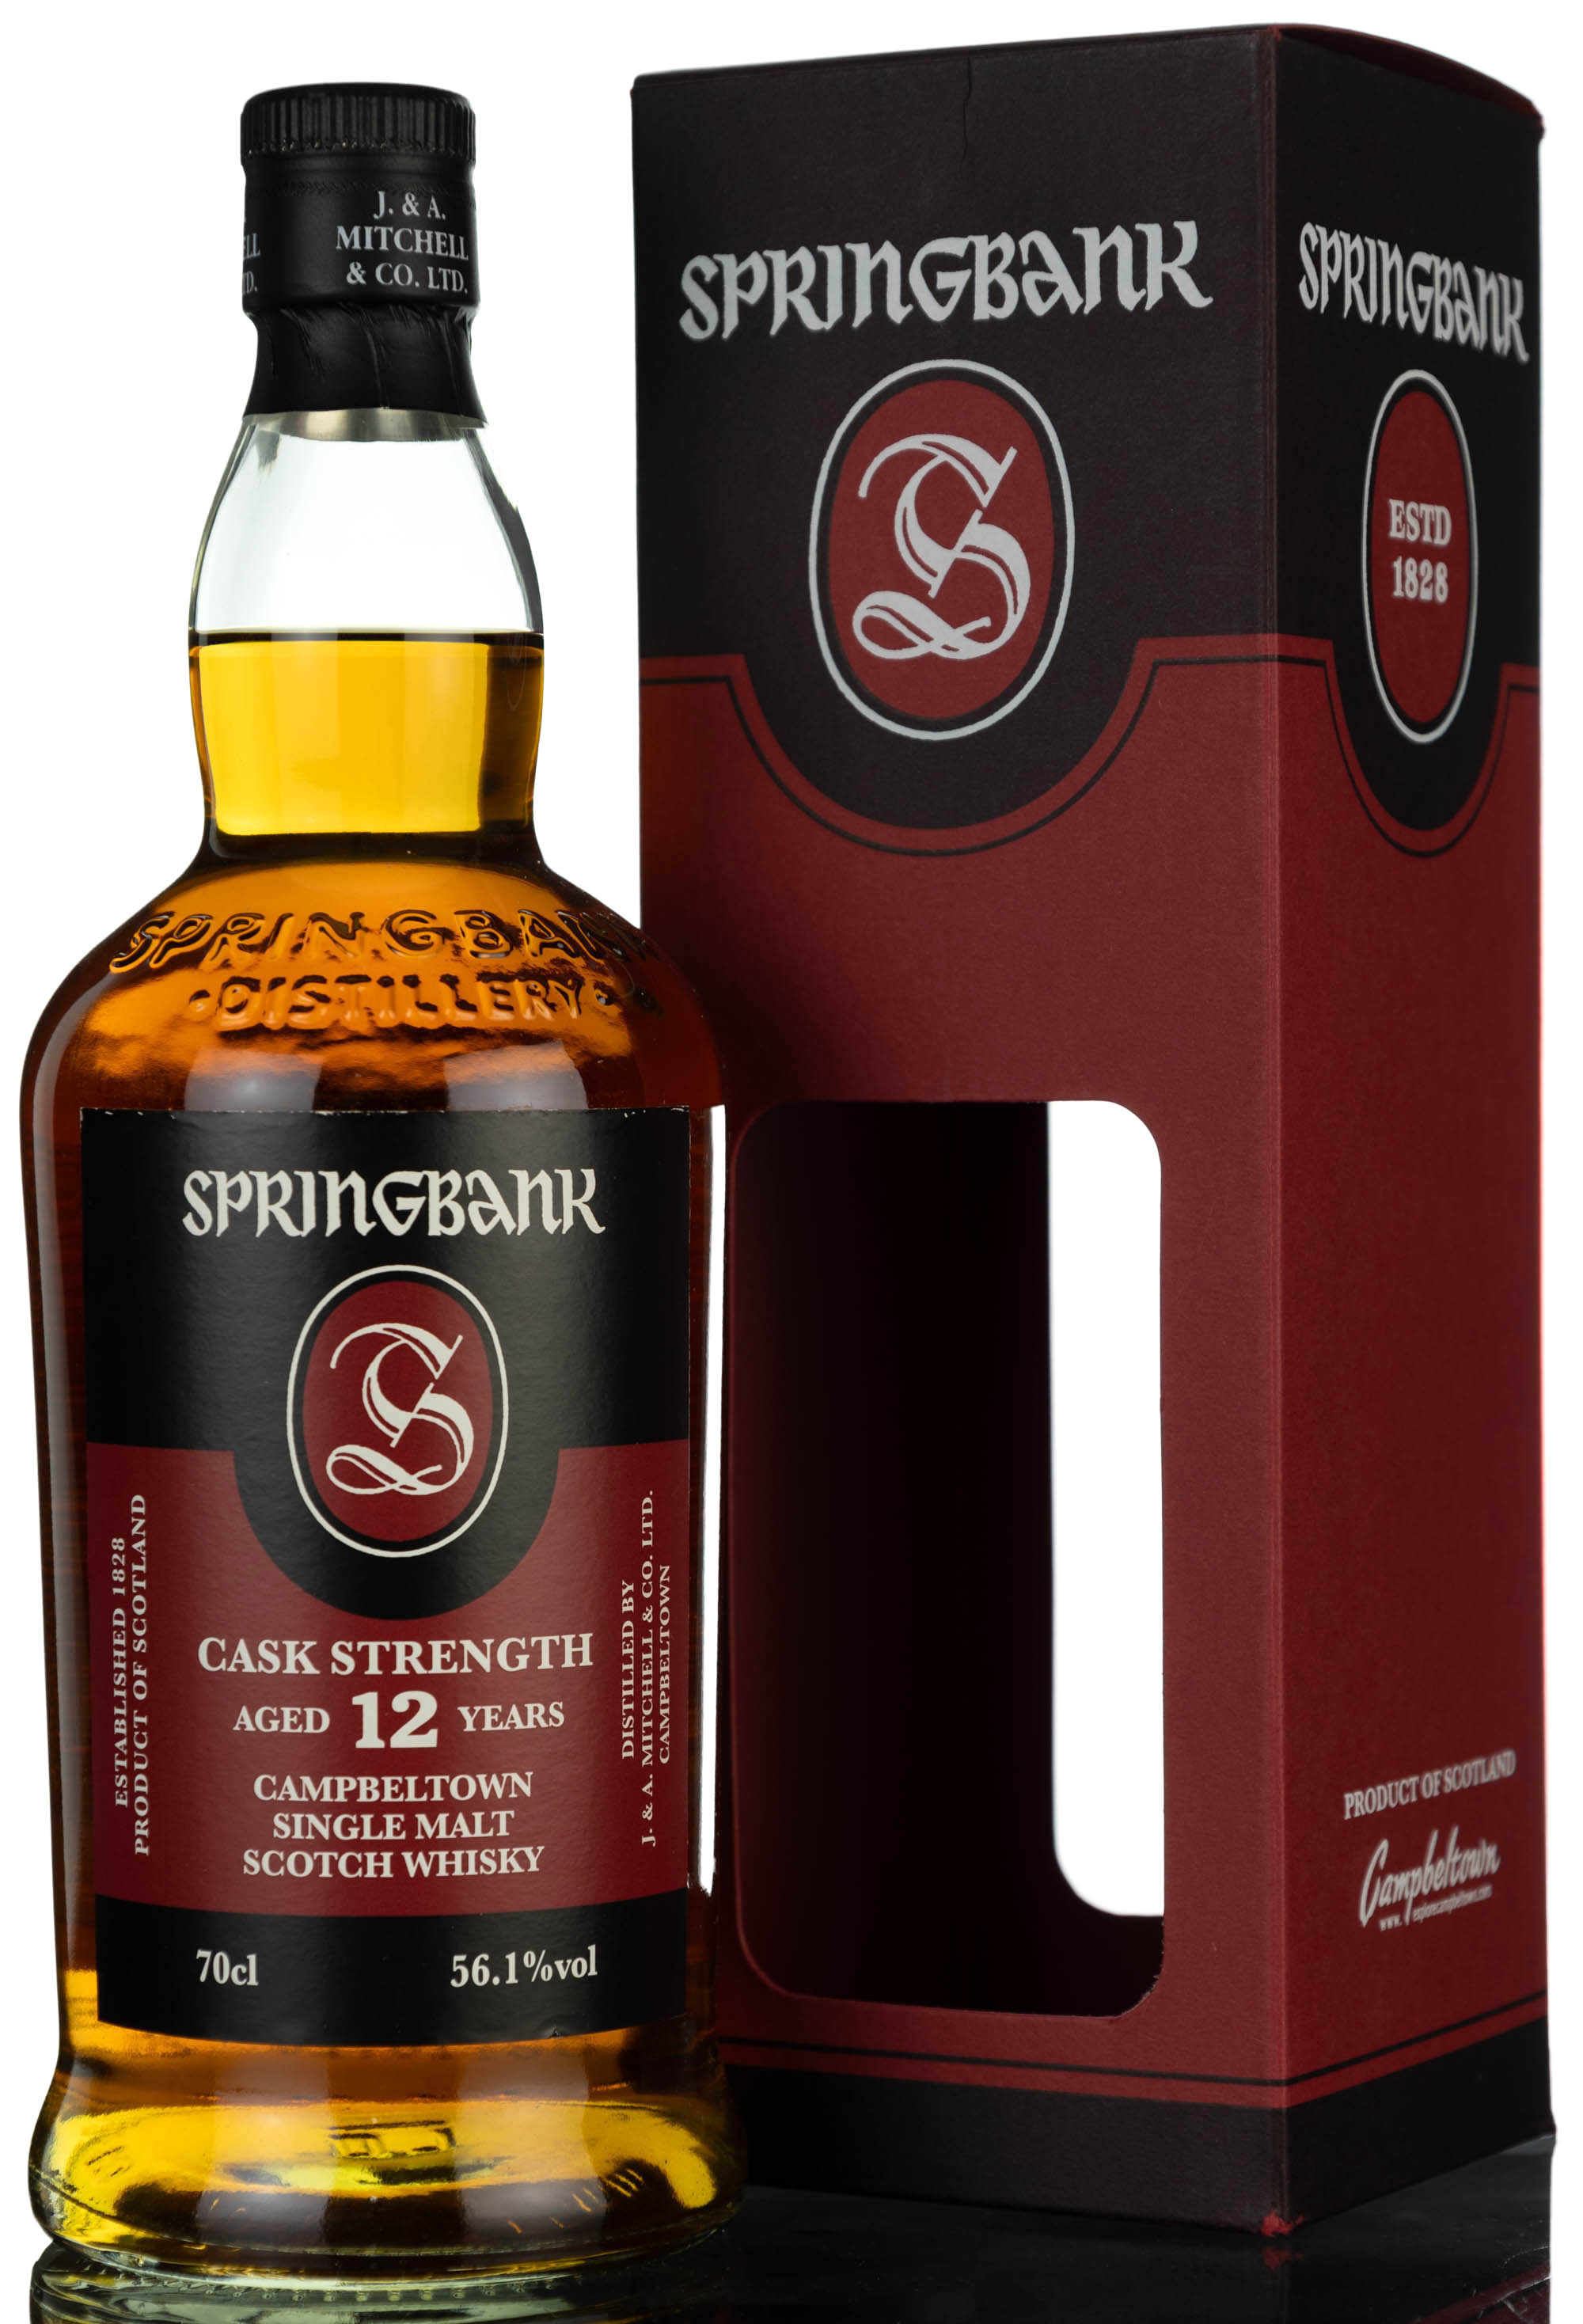 Springbank 12 Year Old - Cask Strength 56.1% - 2020 Release